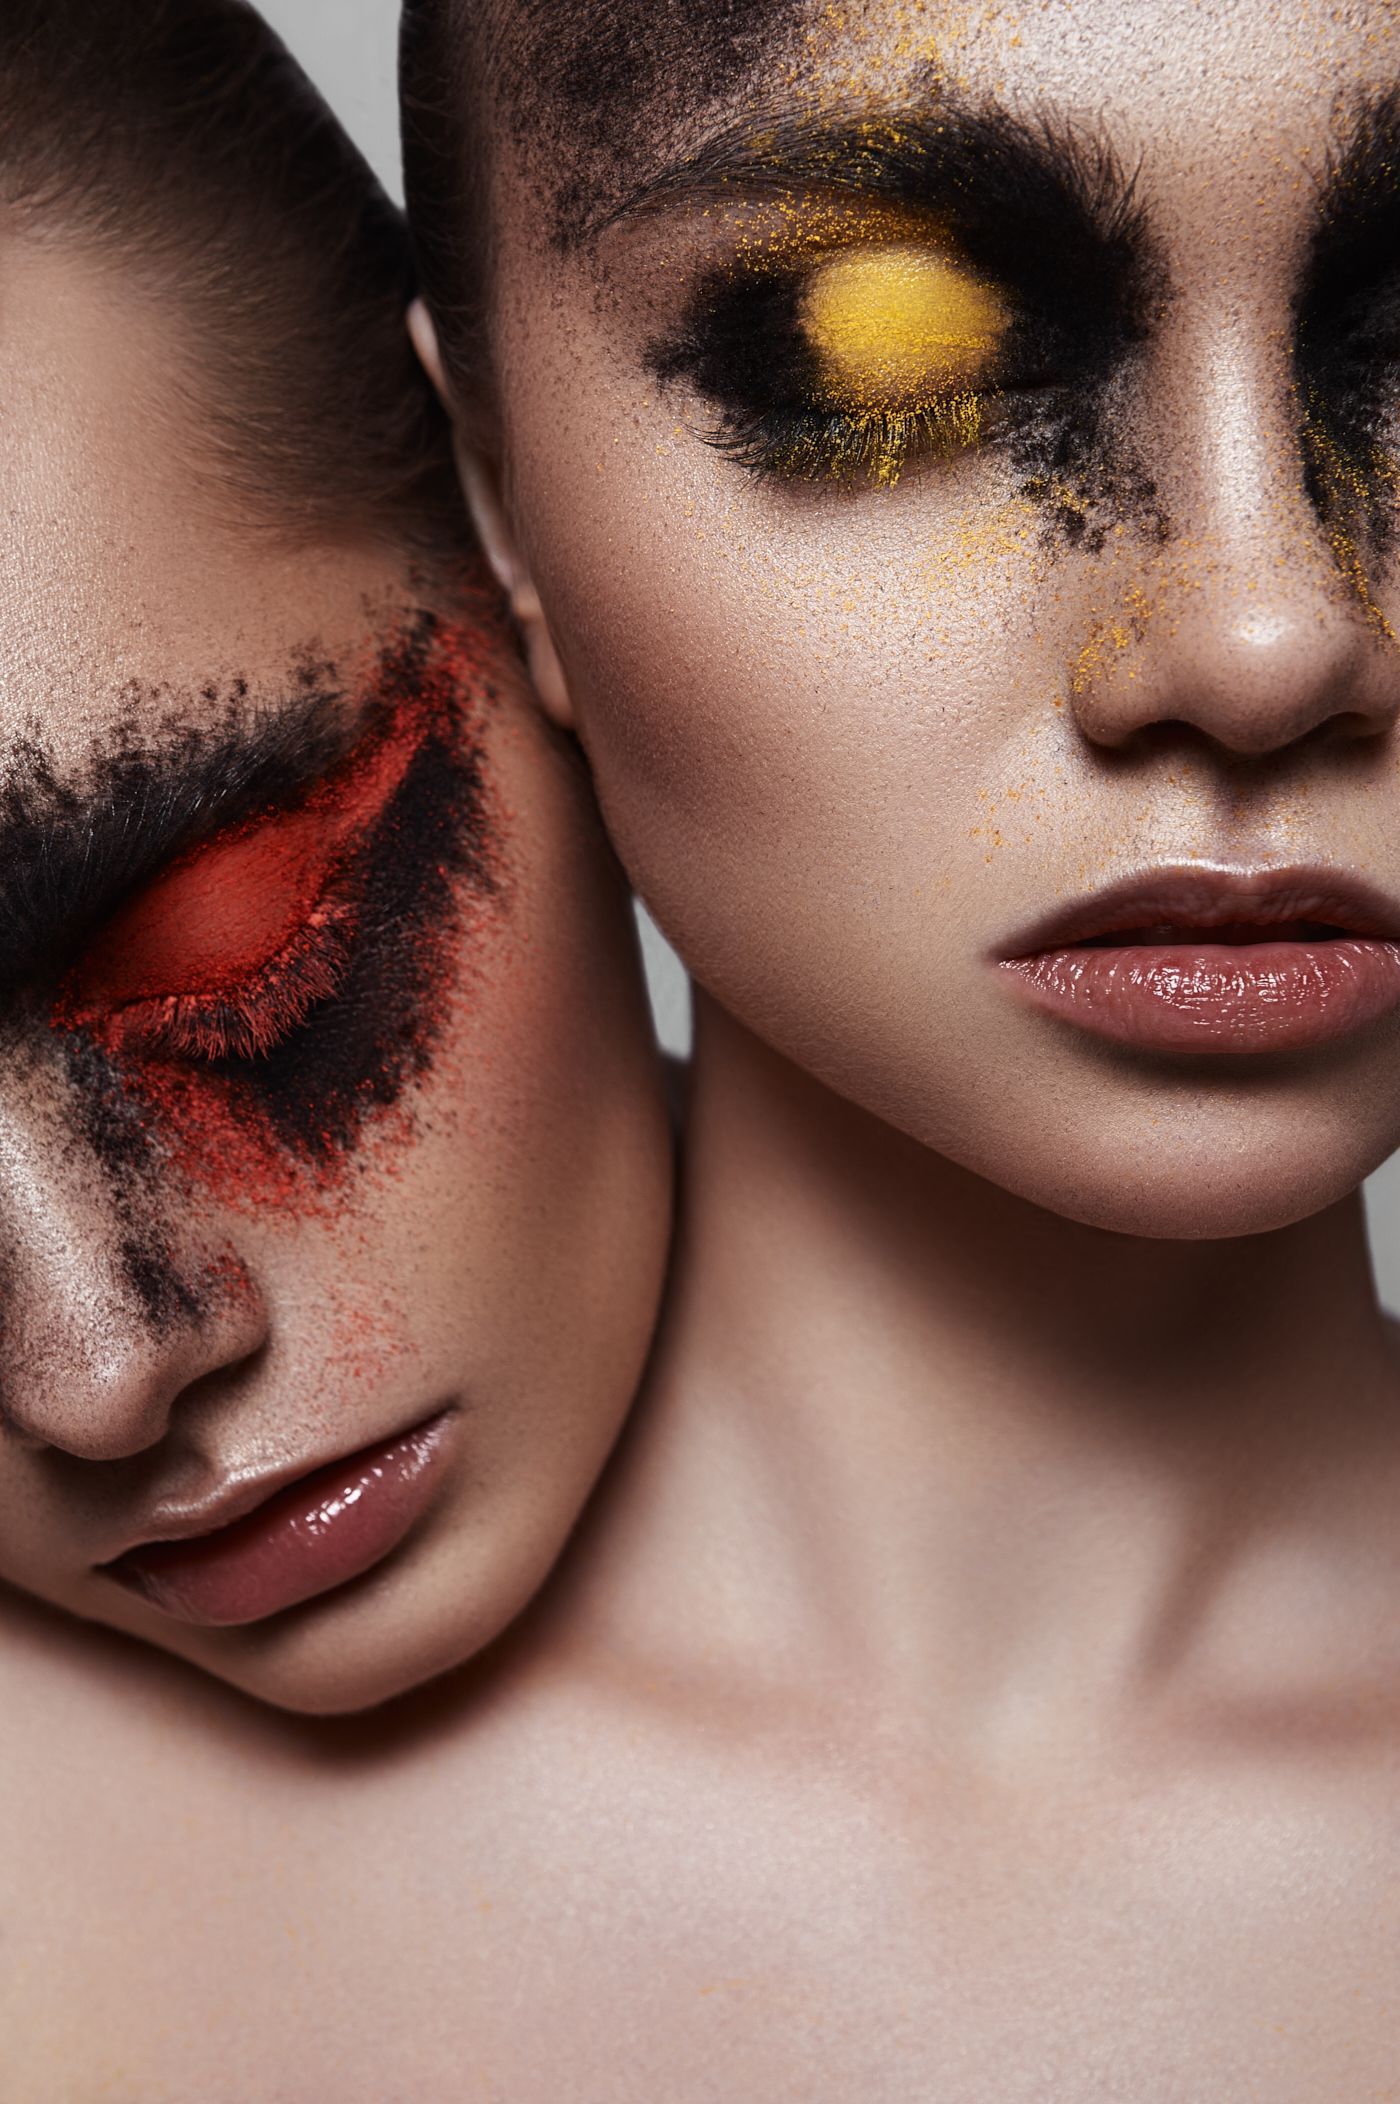 Beauty Girls with Powder creative Makeup - Beauty Girls with Powder creative Makeup -   17 beauty Photoshoot red ideas